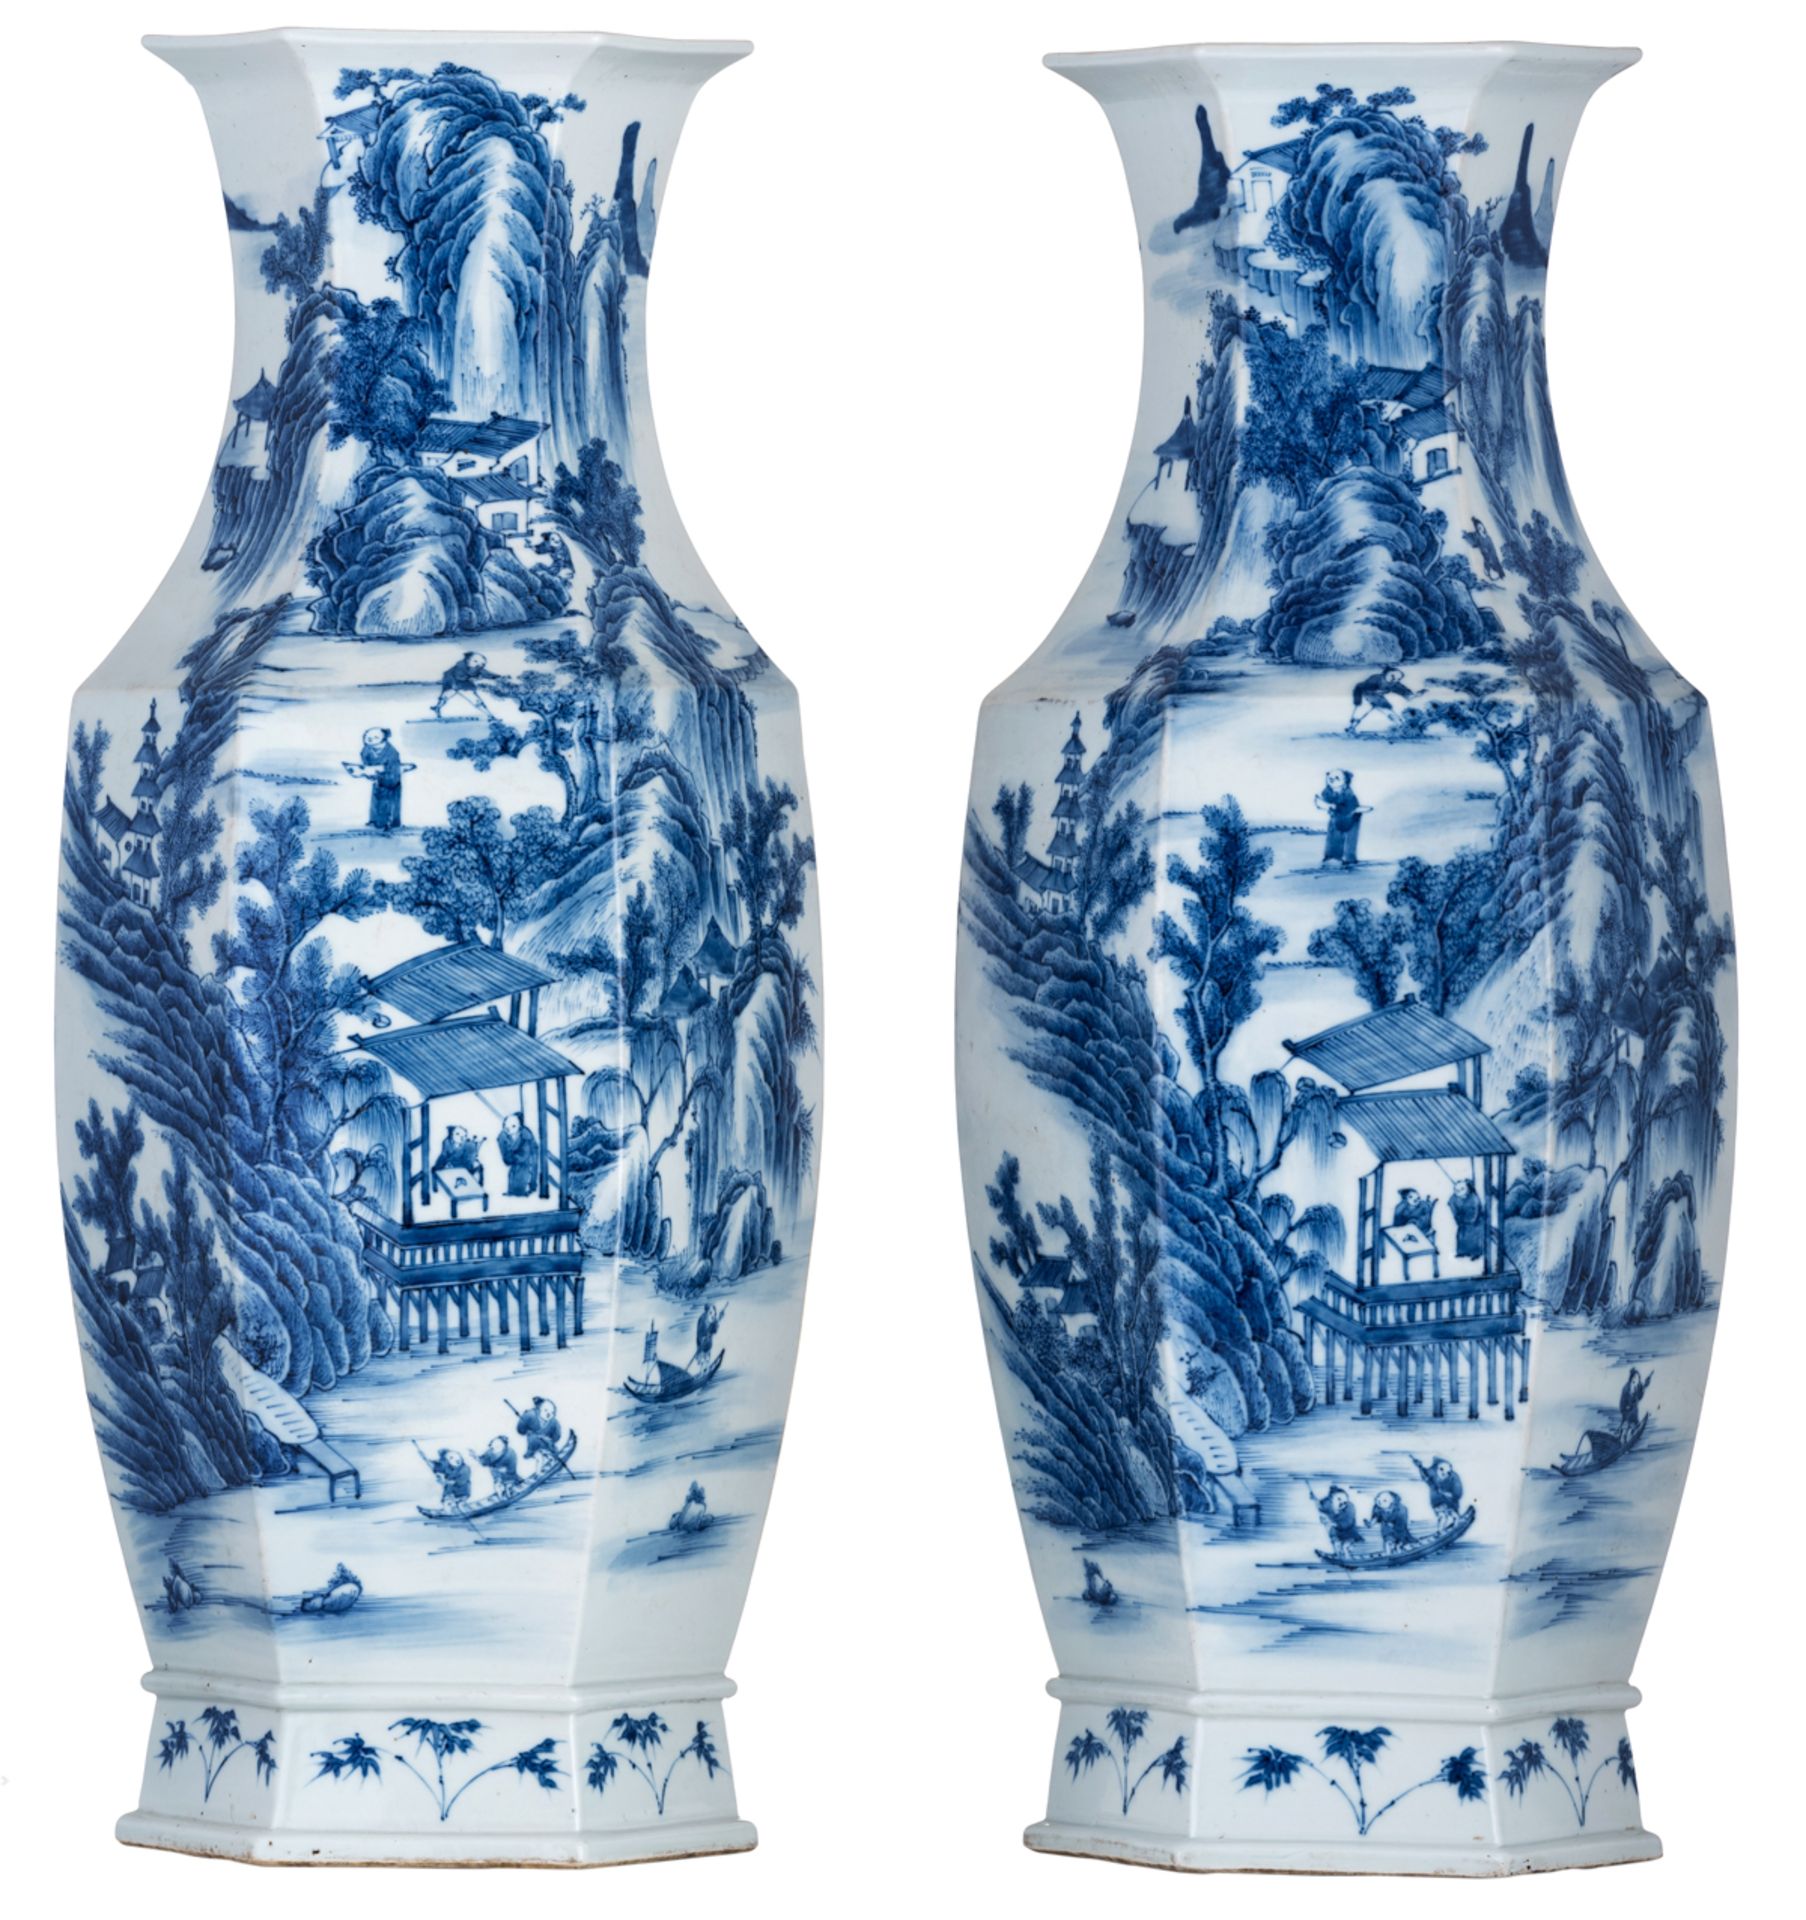 A pair of Chinese blue and white hexagonal vases, overall decorated with pavilions and figures in a